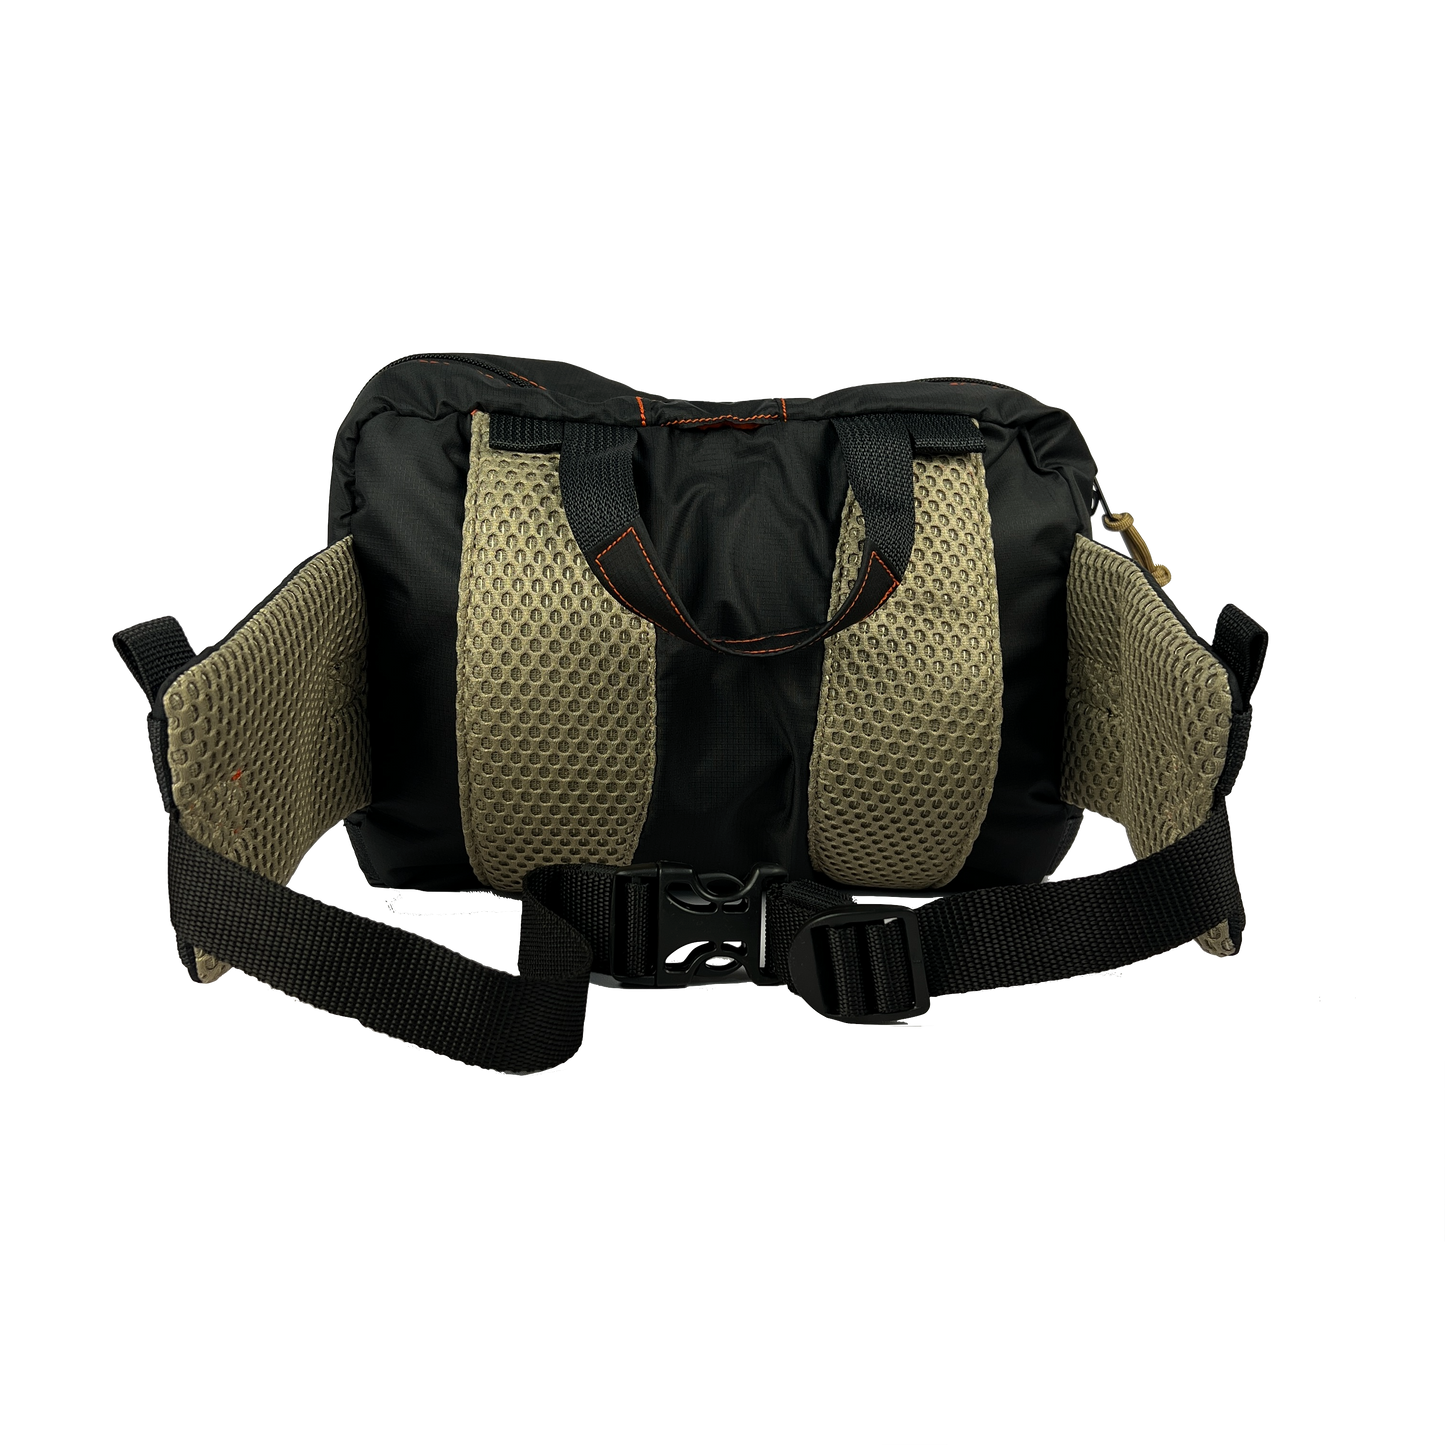 Firearm concealment gear bag and fishing fanny lumbar pack